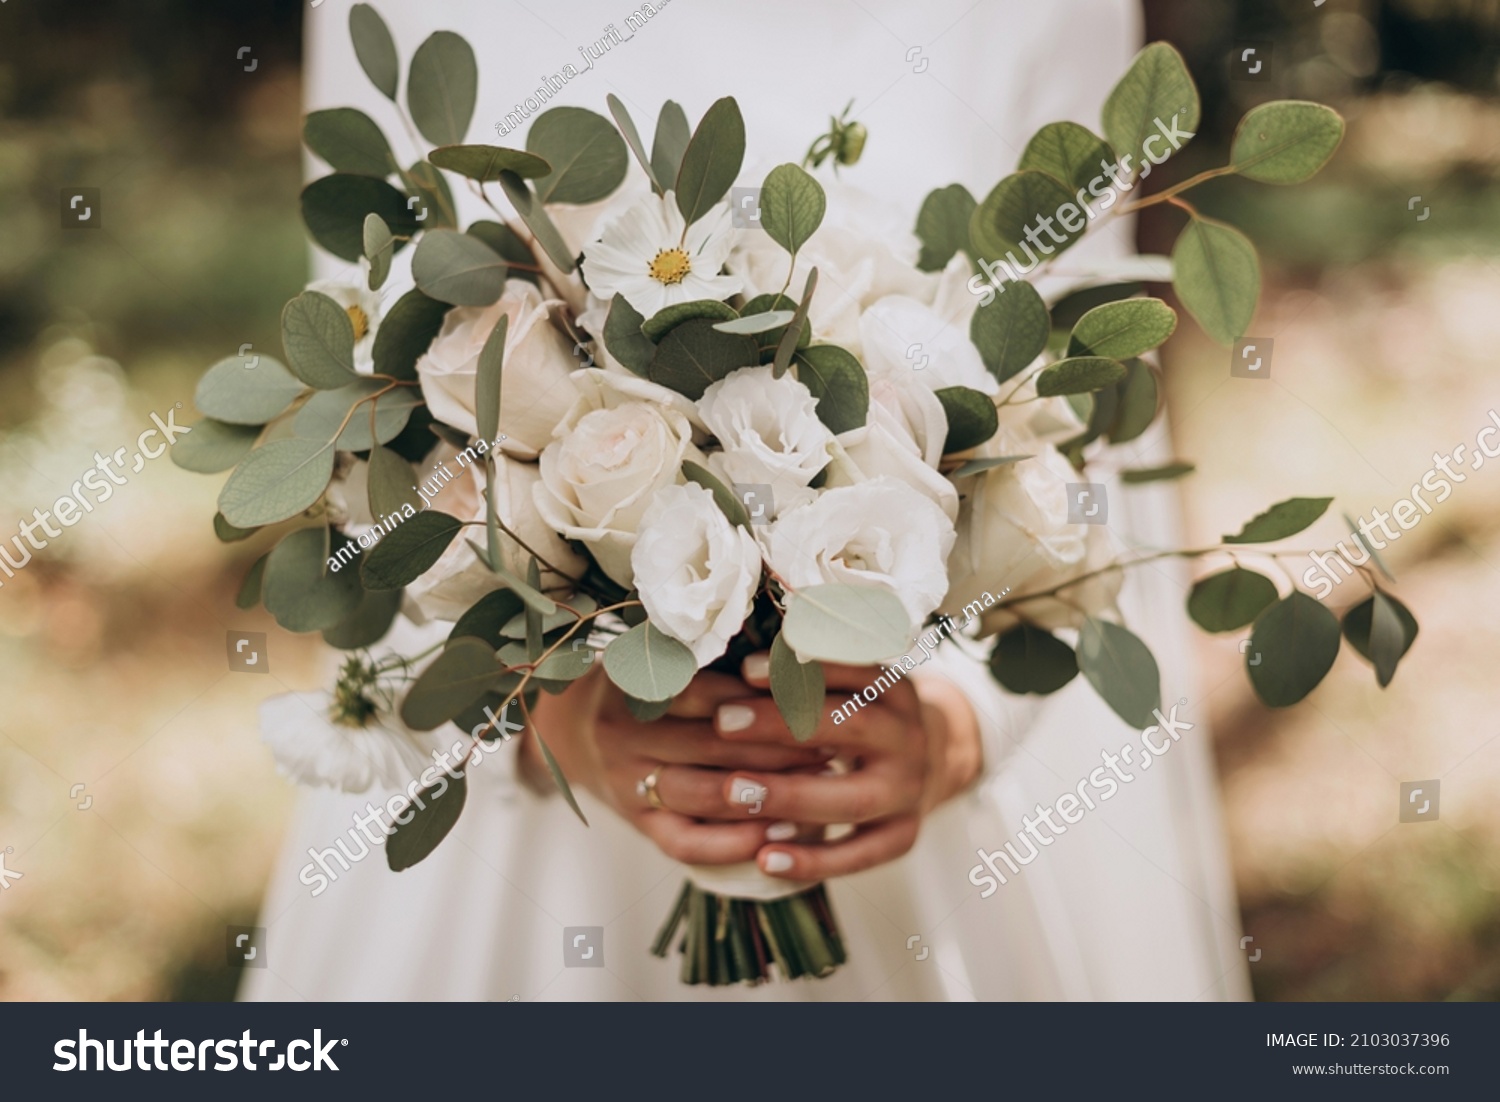 Very beautiful wedding bridal bouquet, made of white roch and austoma, and yellow daisies, green casting of eucalyptus.  Wedding, engagement. Bride and groom. Bride's wedding bouquet. #2103037396